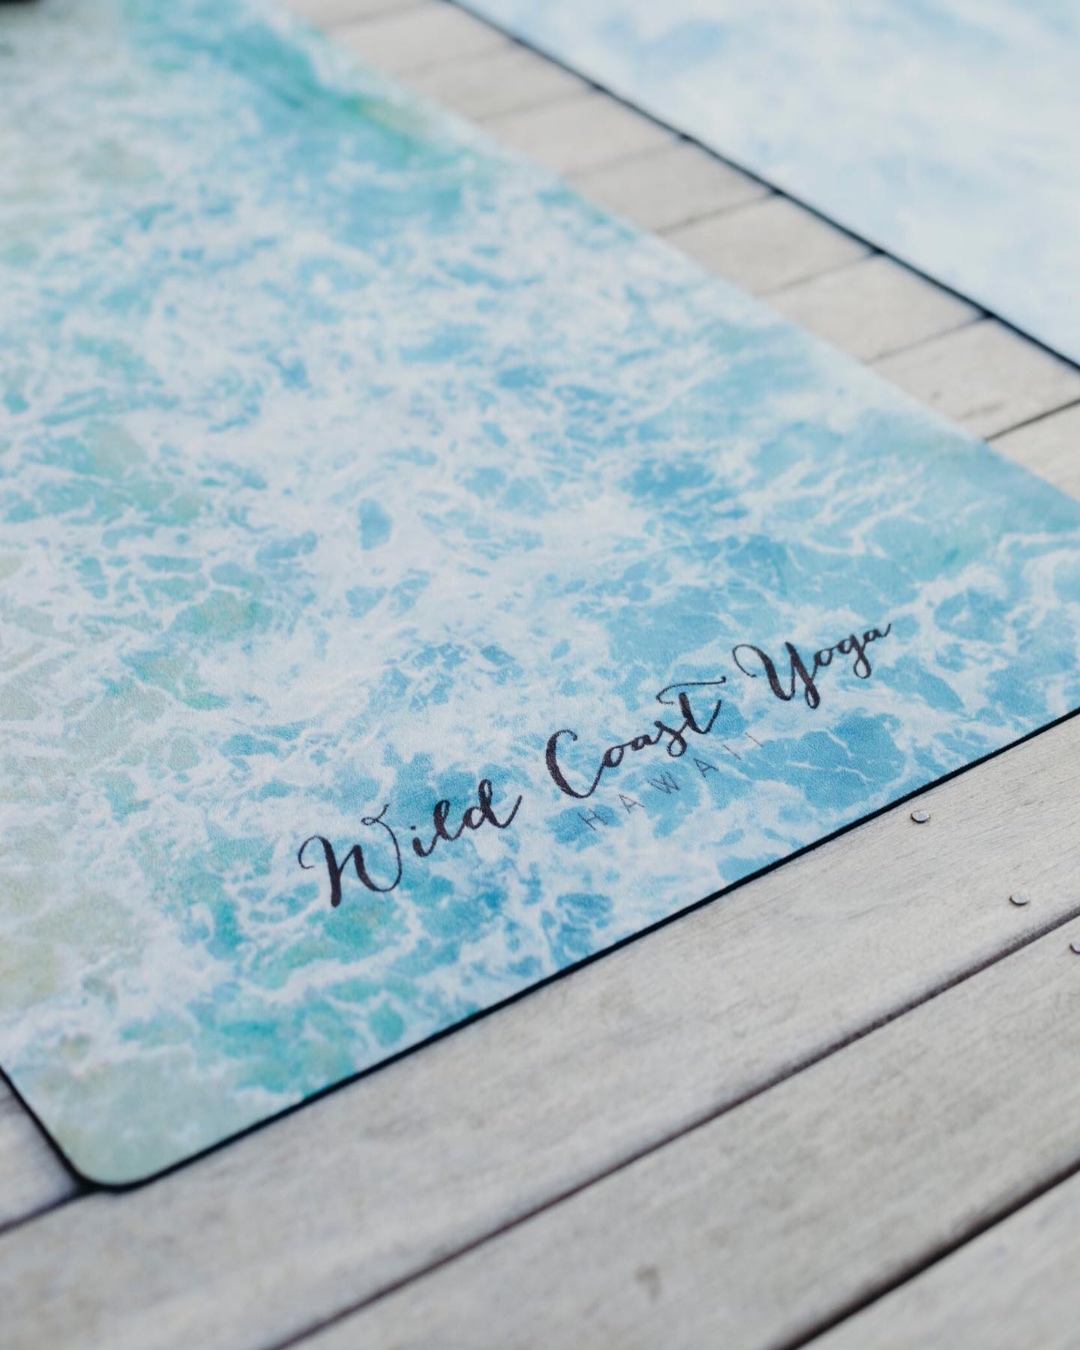 The edge of a yoga mat covered in a wave print with ‘Wild Coast Yoga’ written on it. 